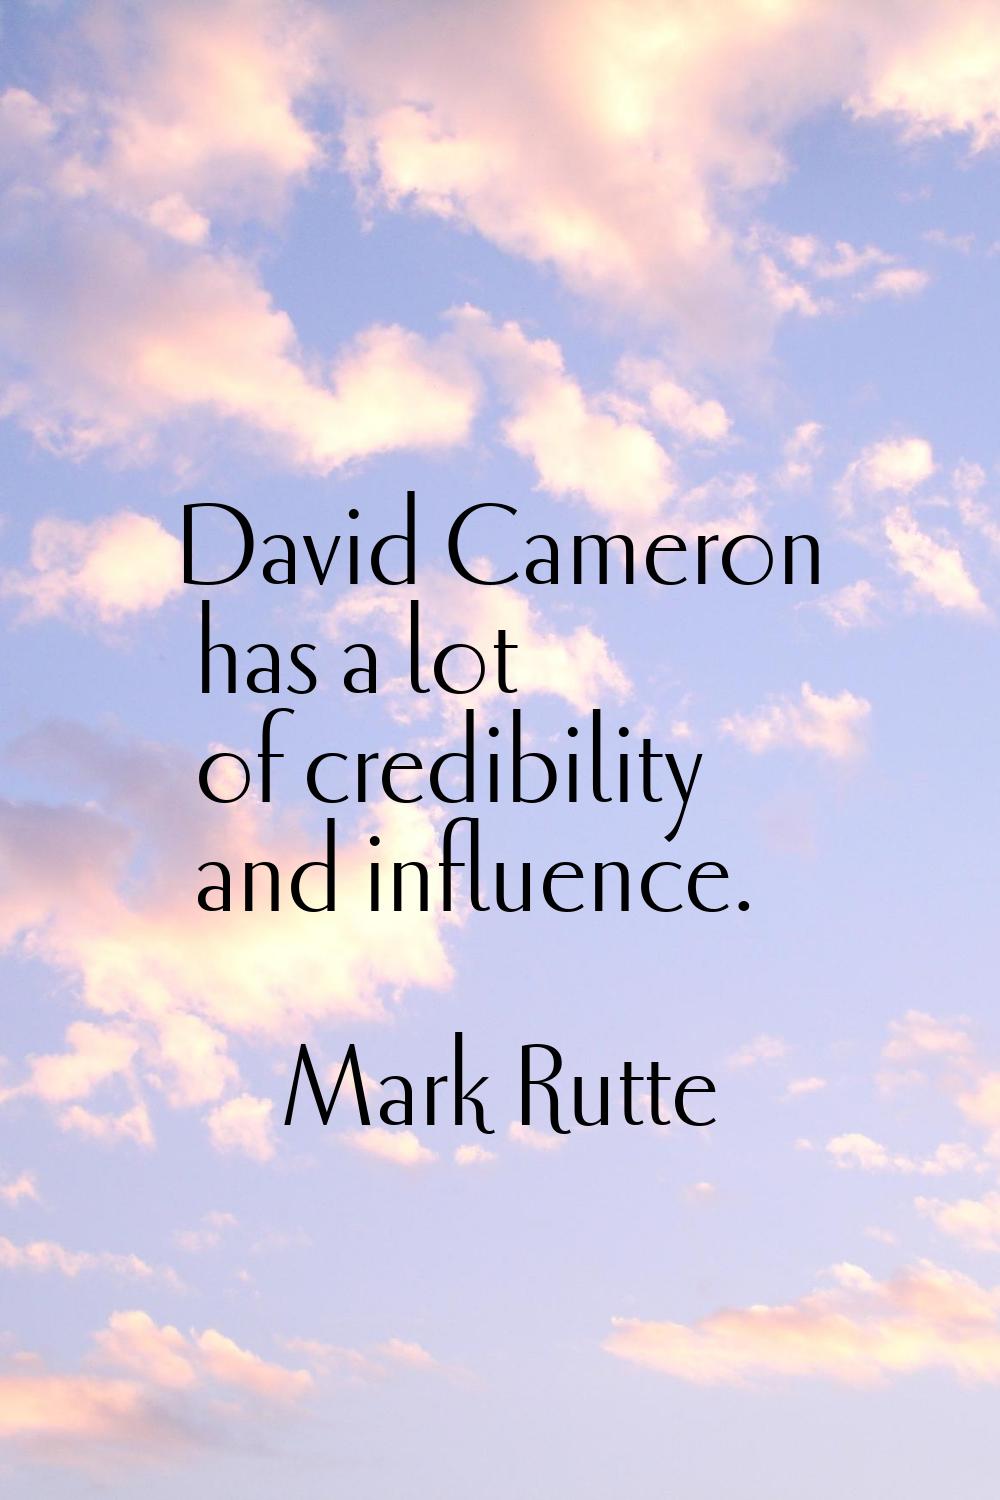 David Cameron has a lot of credibility and influence.